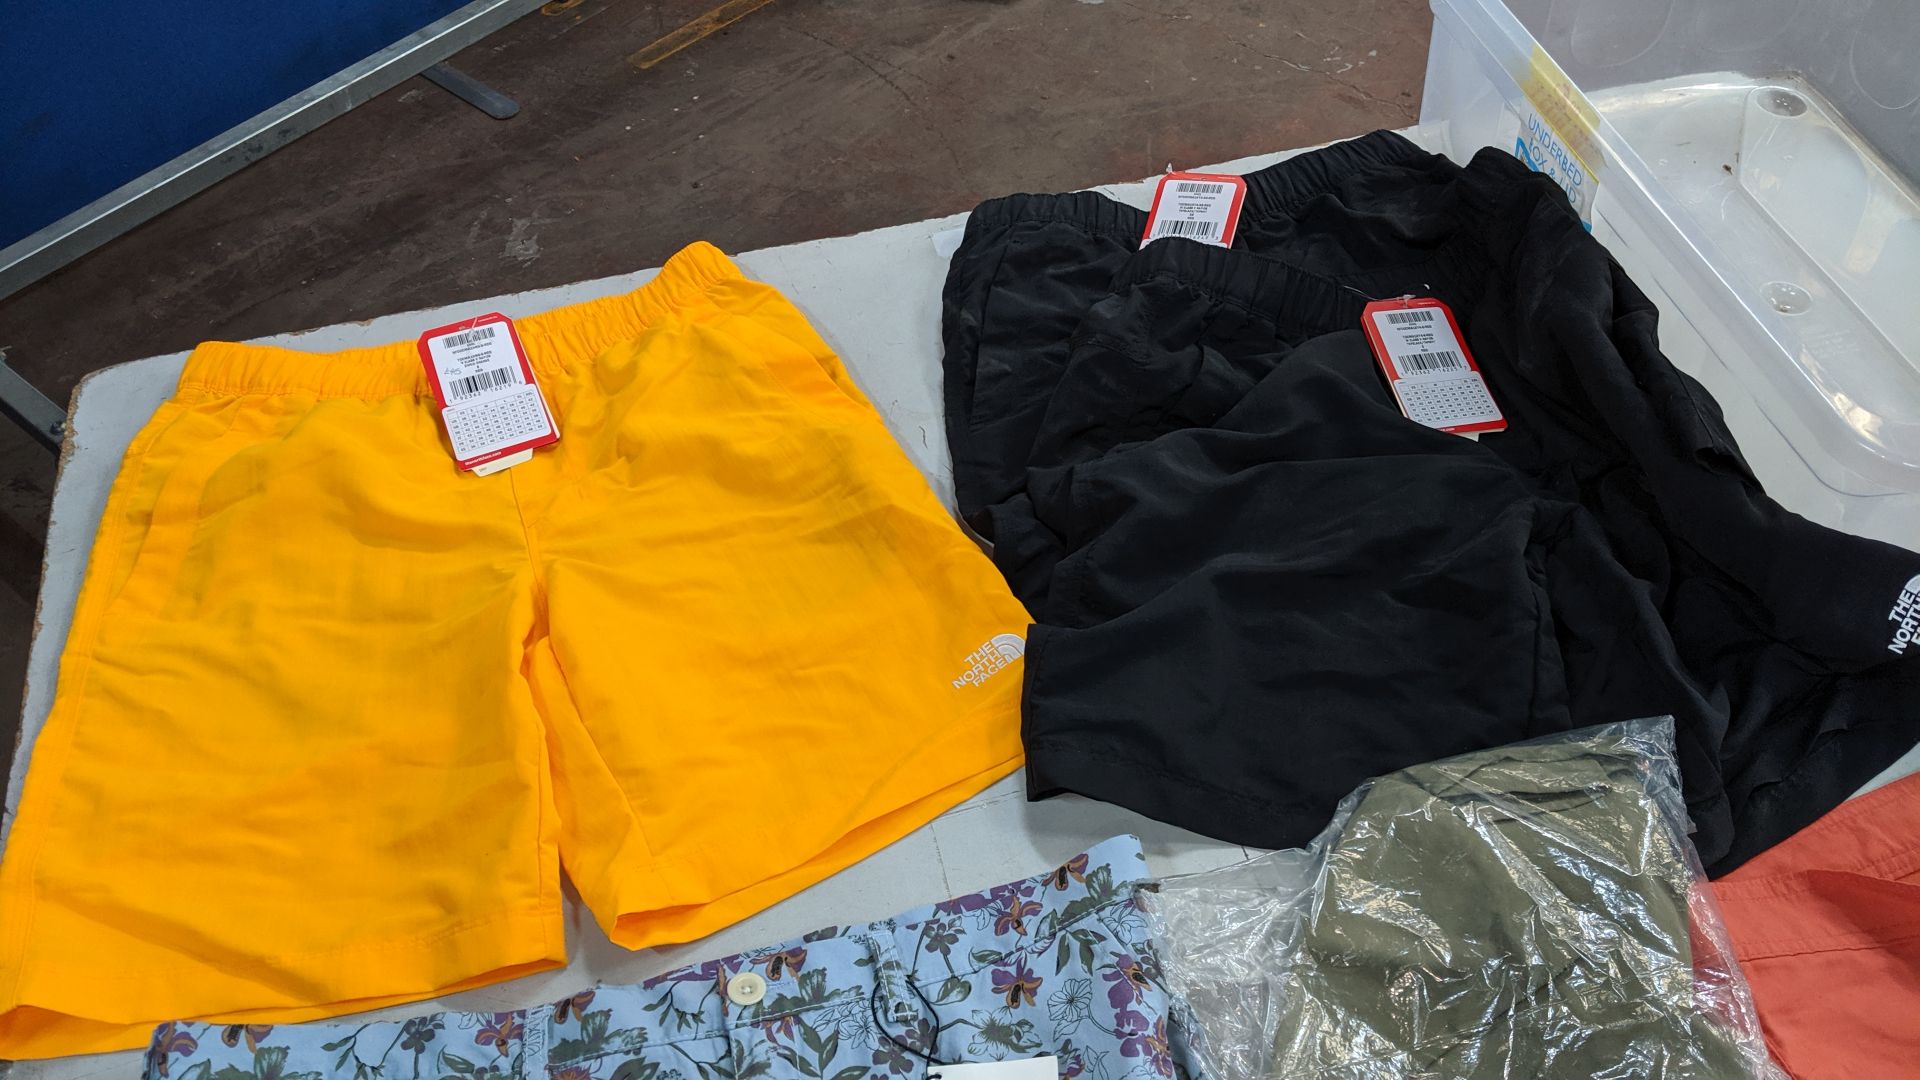 6 off shorts & swim shorts by North Face, Napapijri, Tuk Tuk & others. This is one of a number of - Image 5 of 6